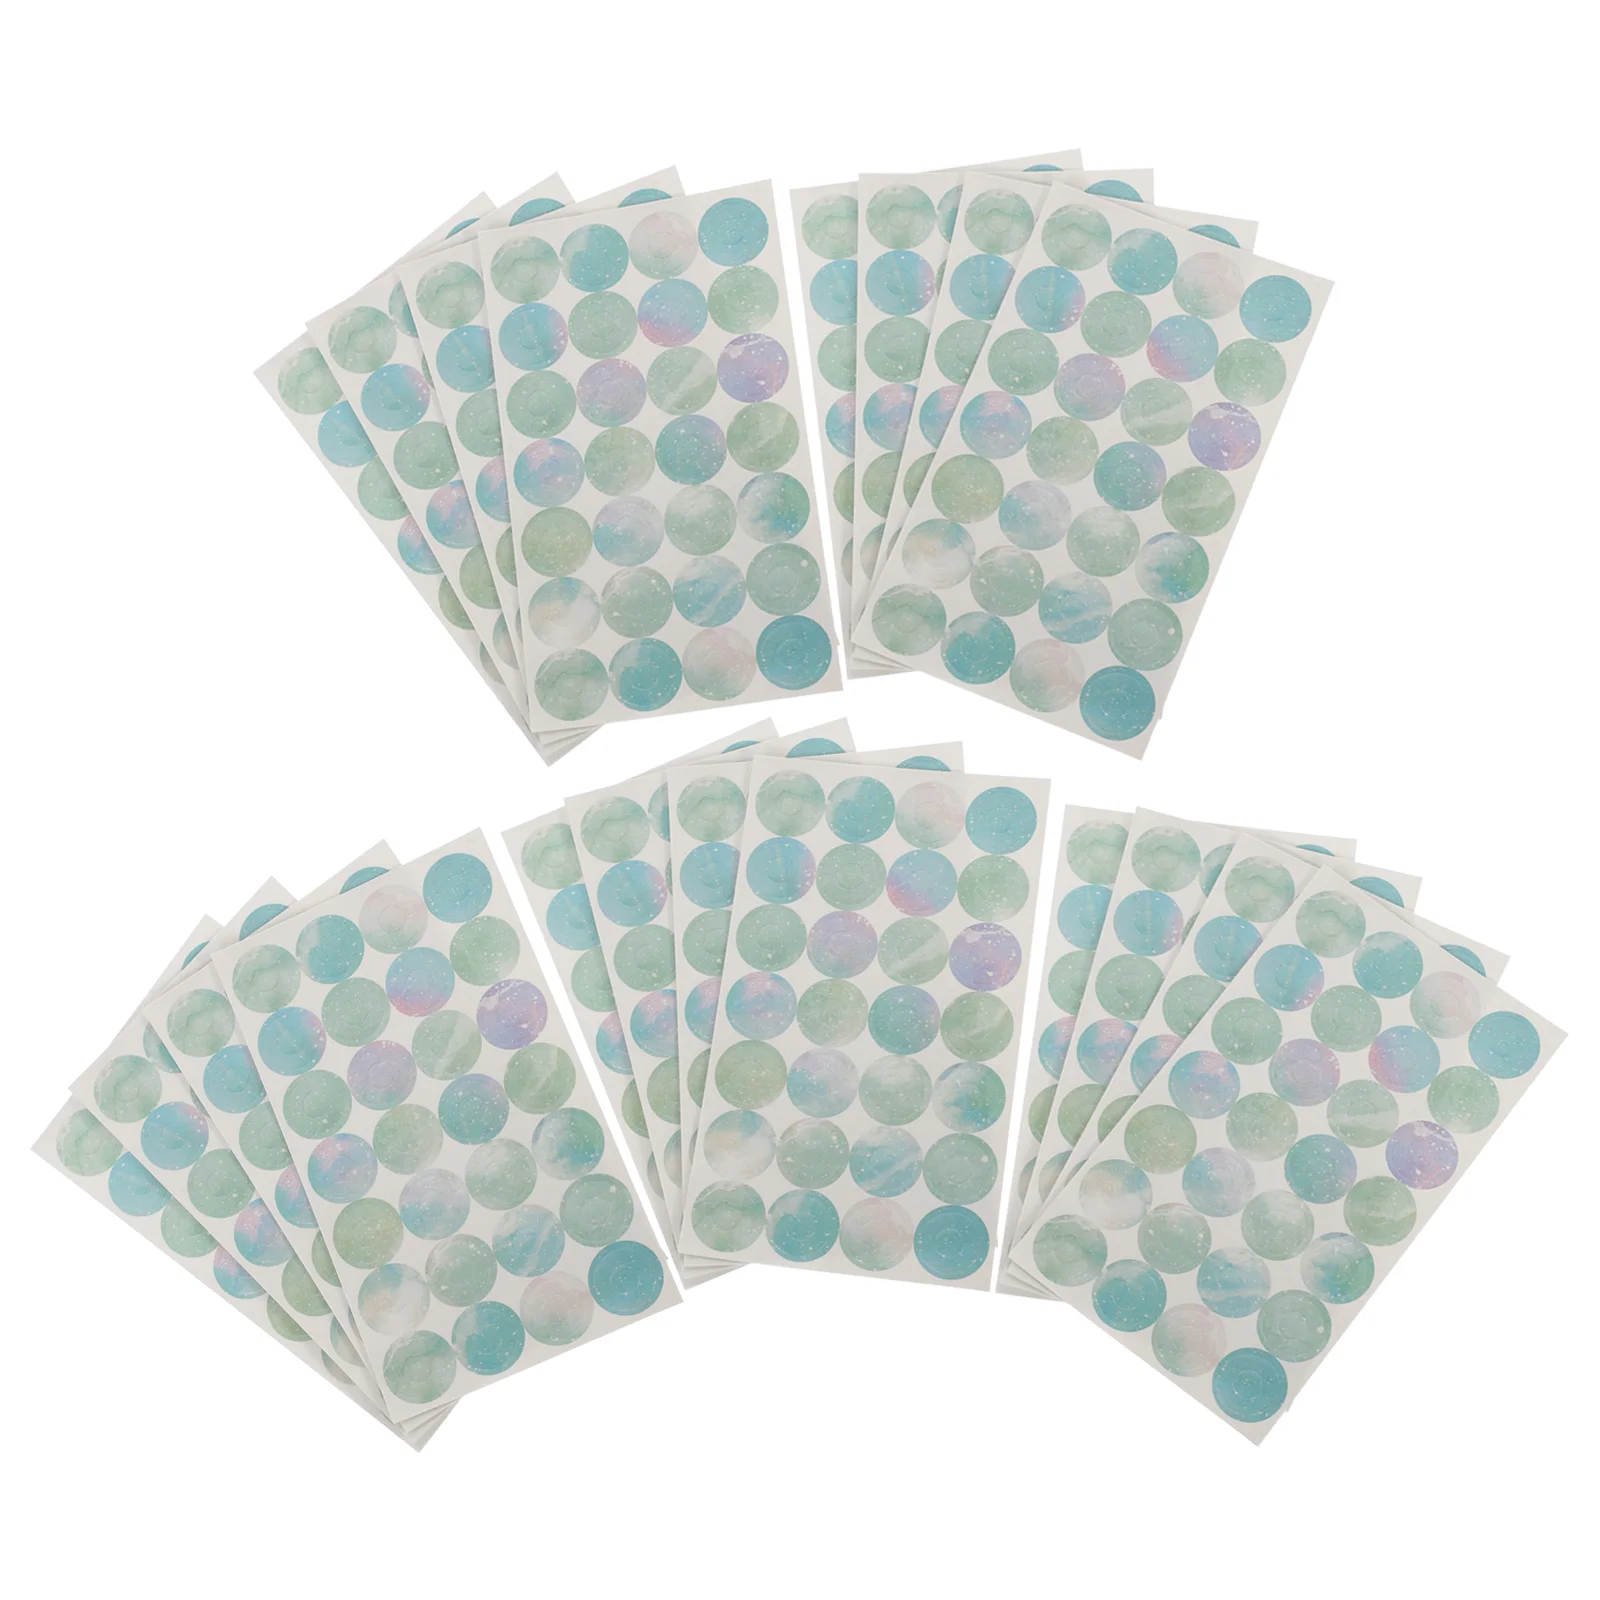 

20 Sheets Loose-leaf Hole Patching Stickers Labels Decorative Reinforcement Paper Reinforcements Round Binder Ring